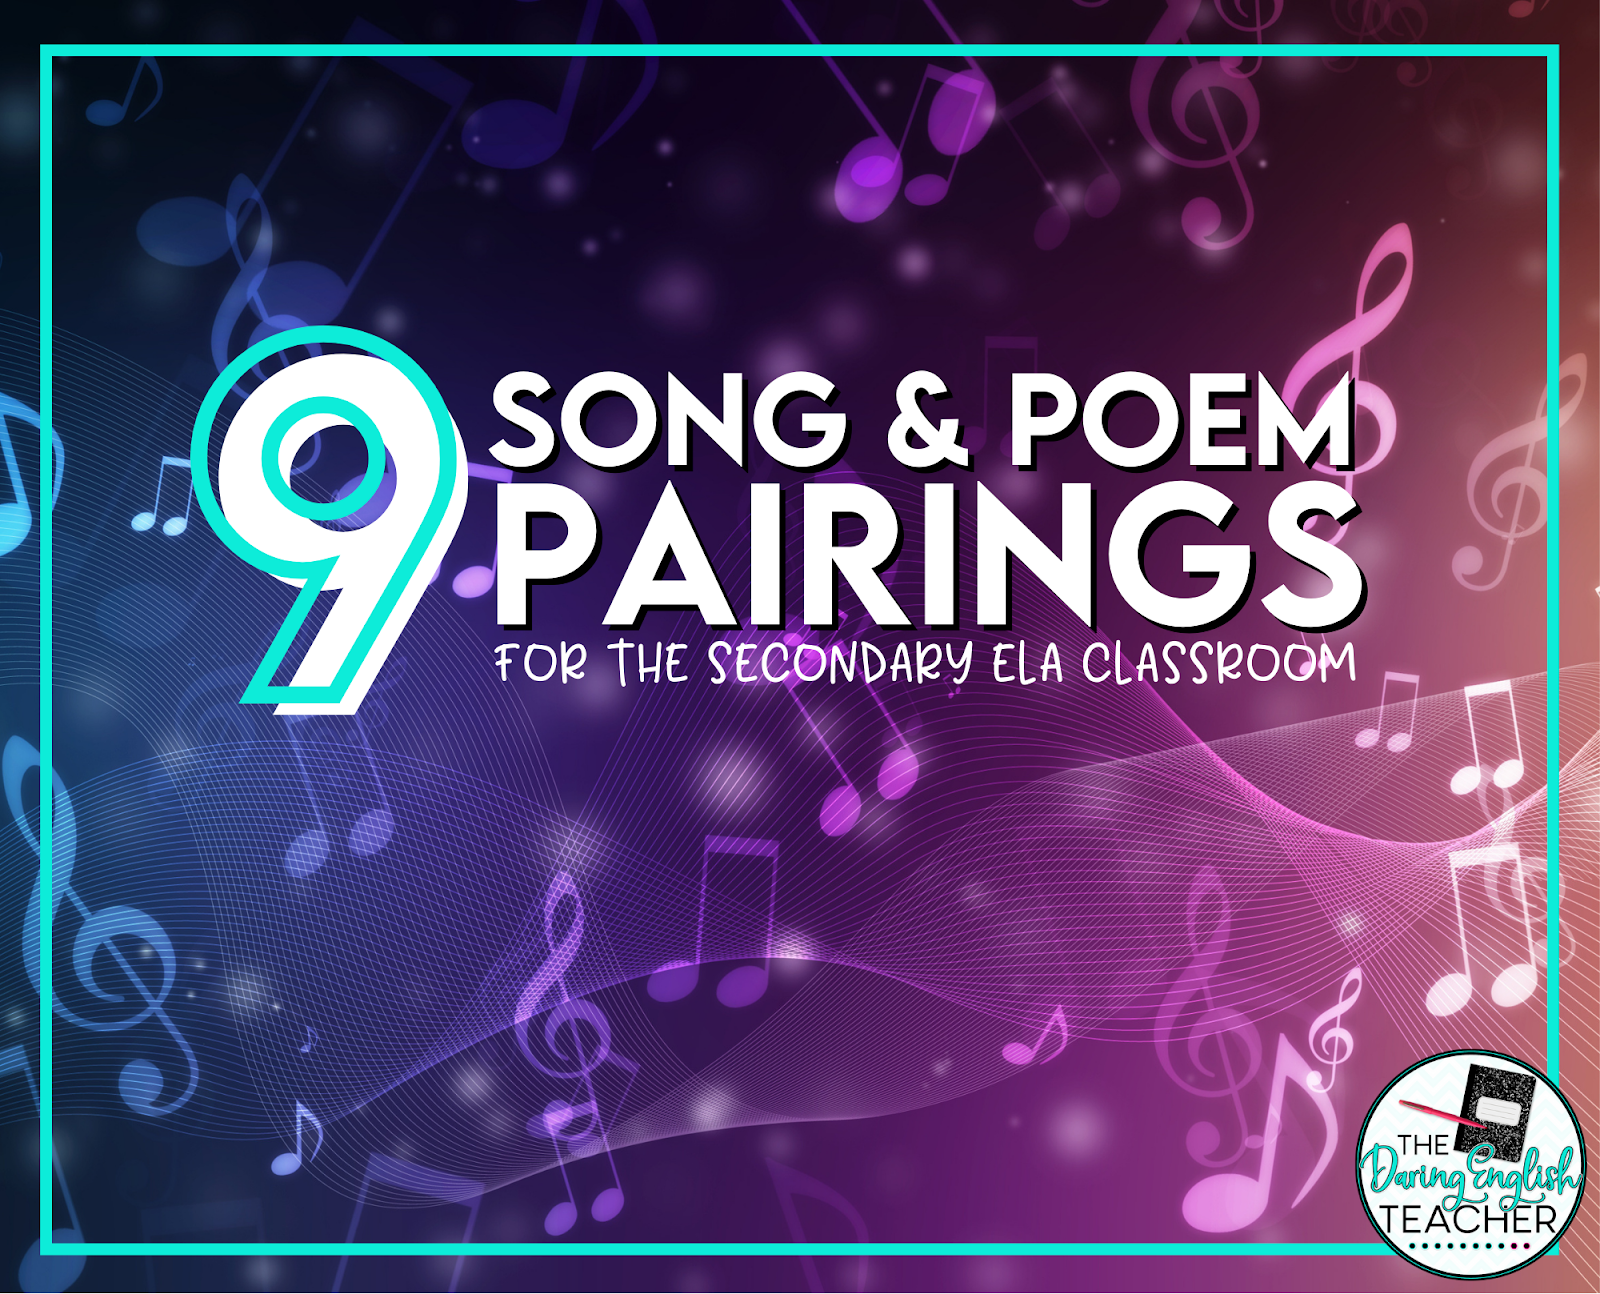 9 Song and Poem Parings for Secondary ELA